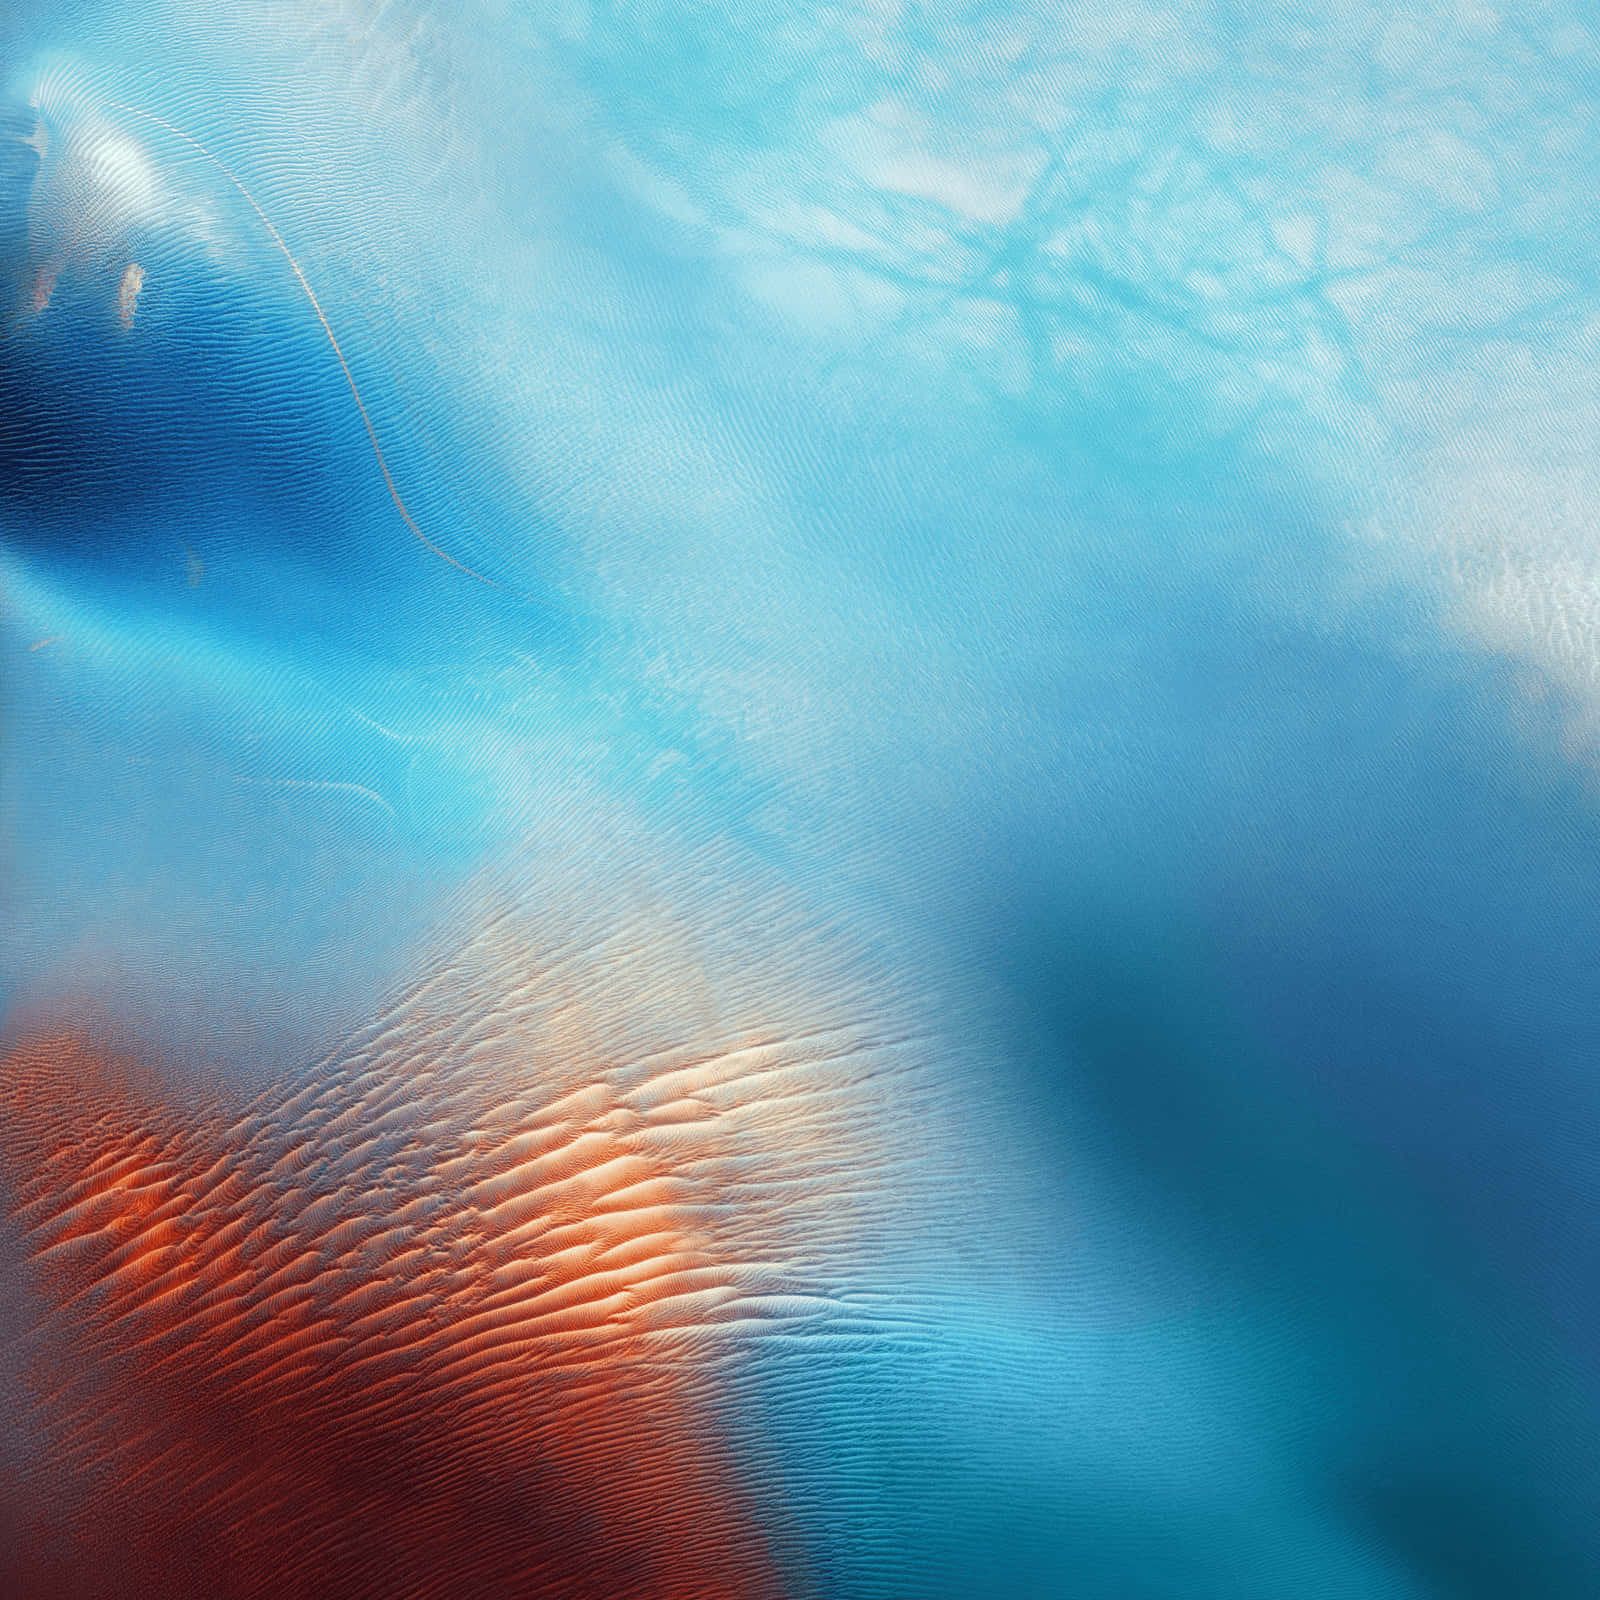 A Blue And Orange Abstract Wallpaper